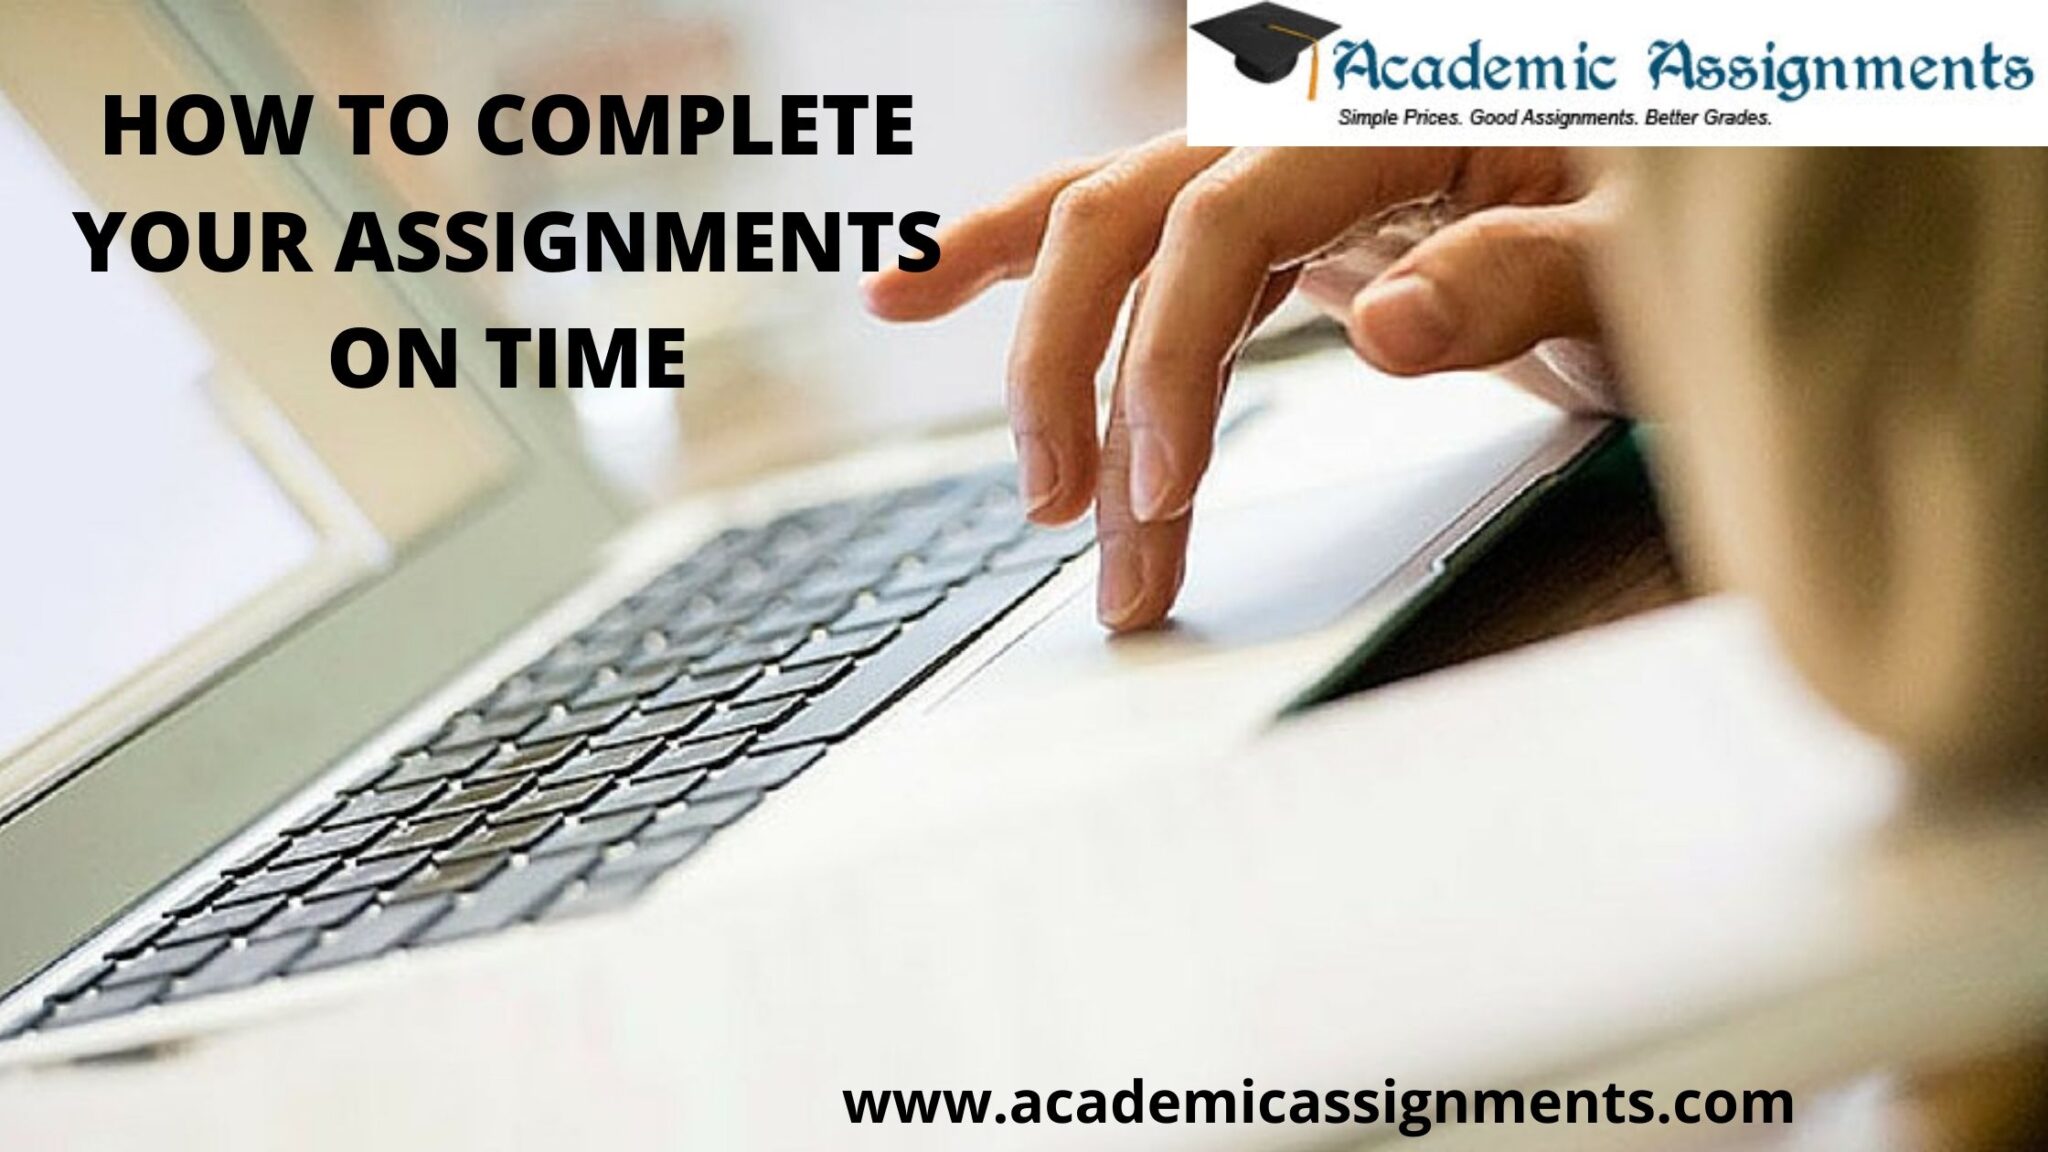 have you completed the assignment